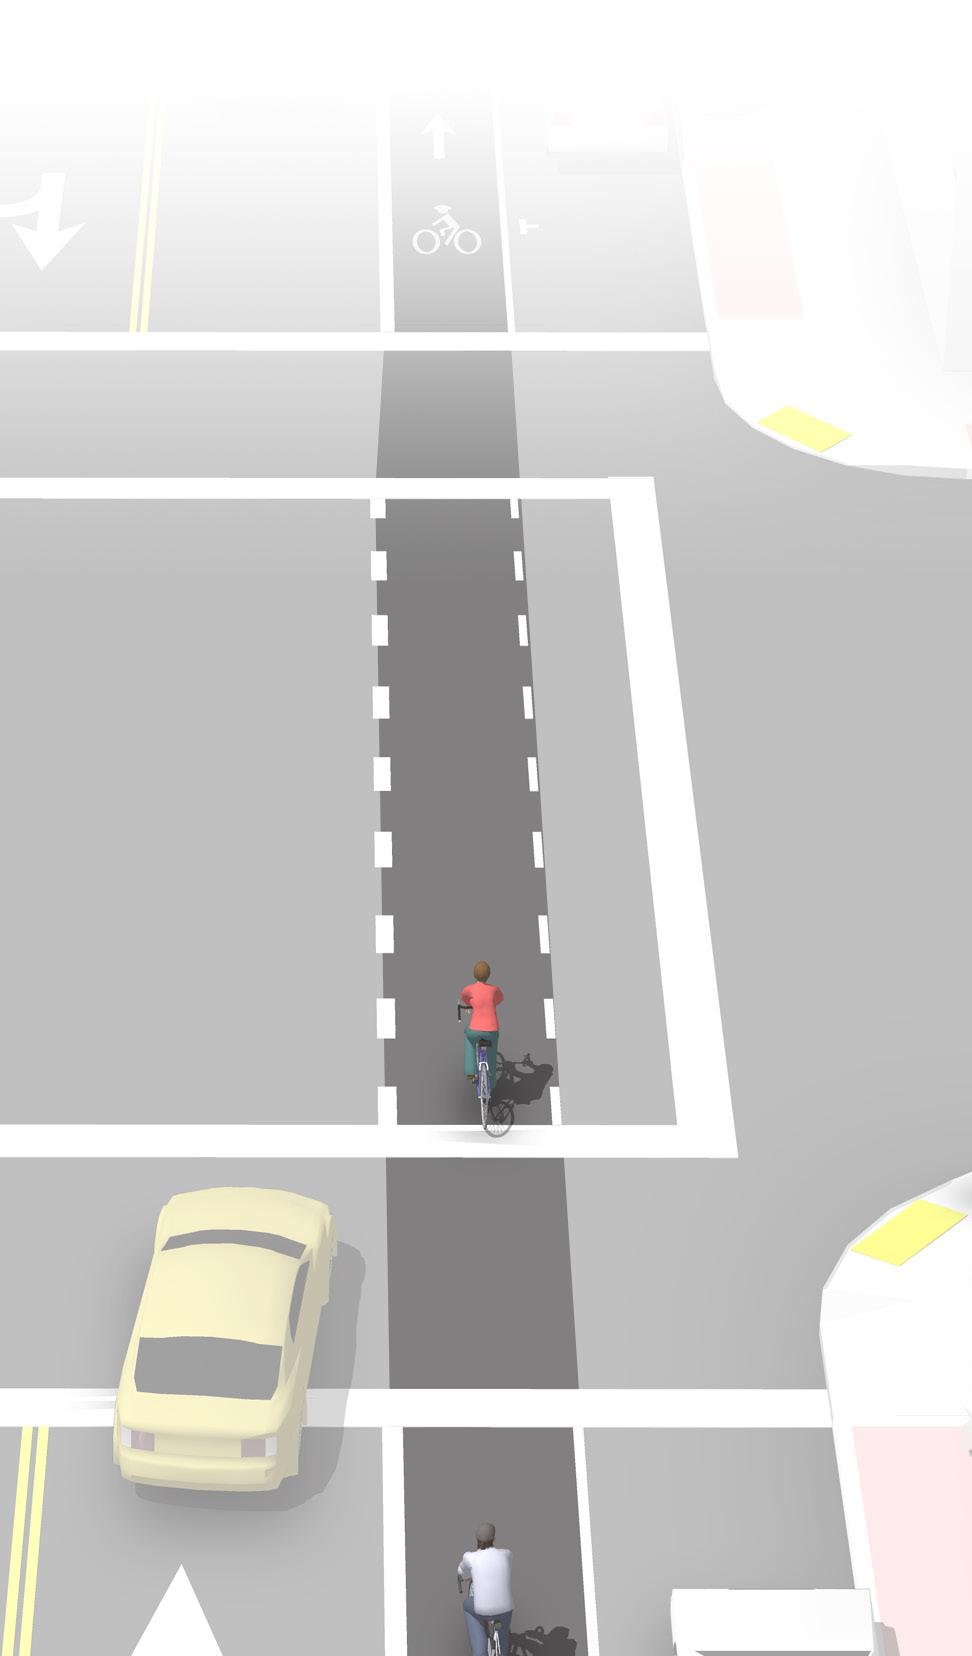 Intersection Crossing Markings APPENDIX F: BICYCLE AND PEDESTRIAN DESIGN GUIDELINES Description Bicycle pavement markings through intersections indicate the intended path of bicyclists through an